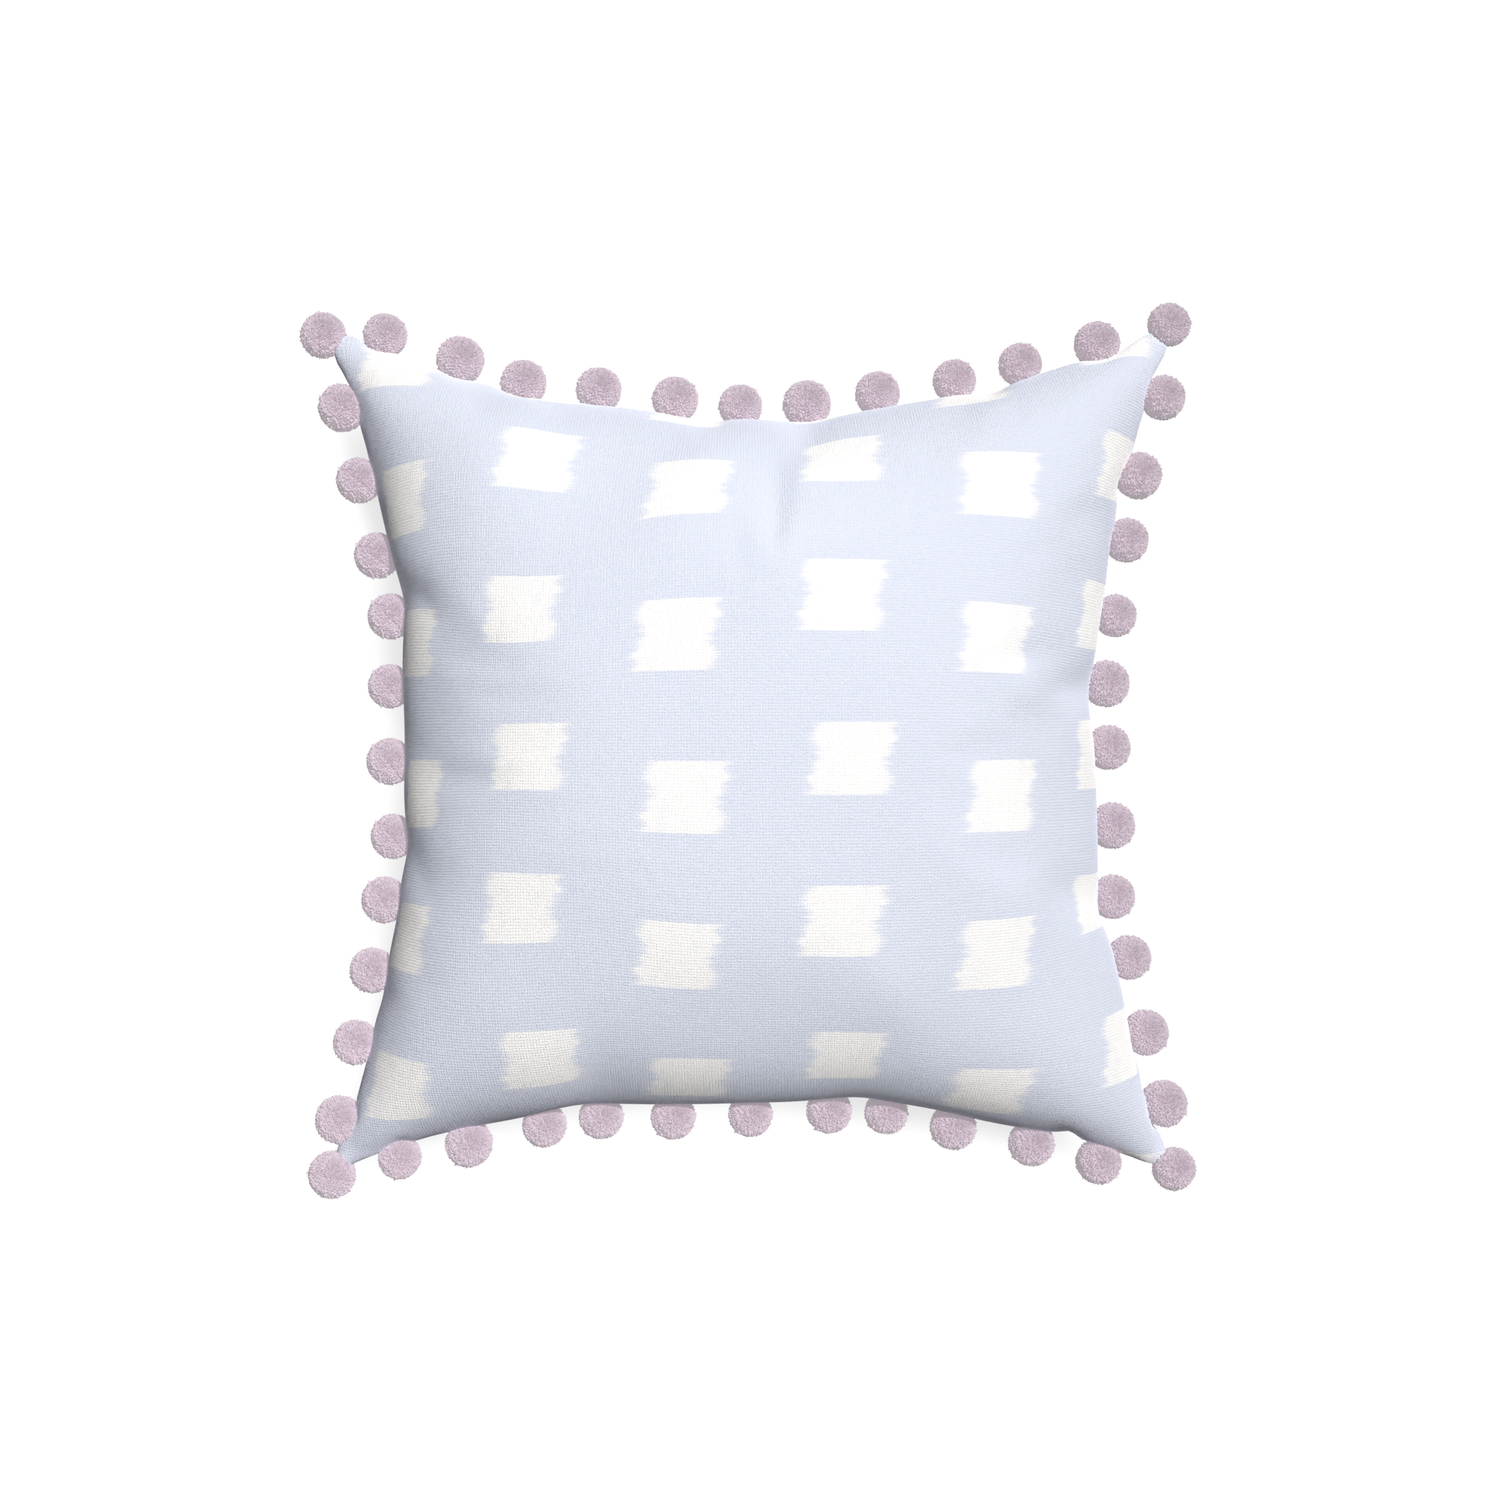 18-square denton custom sky blue patternpillow with l on white background